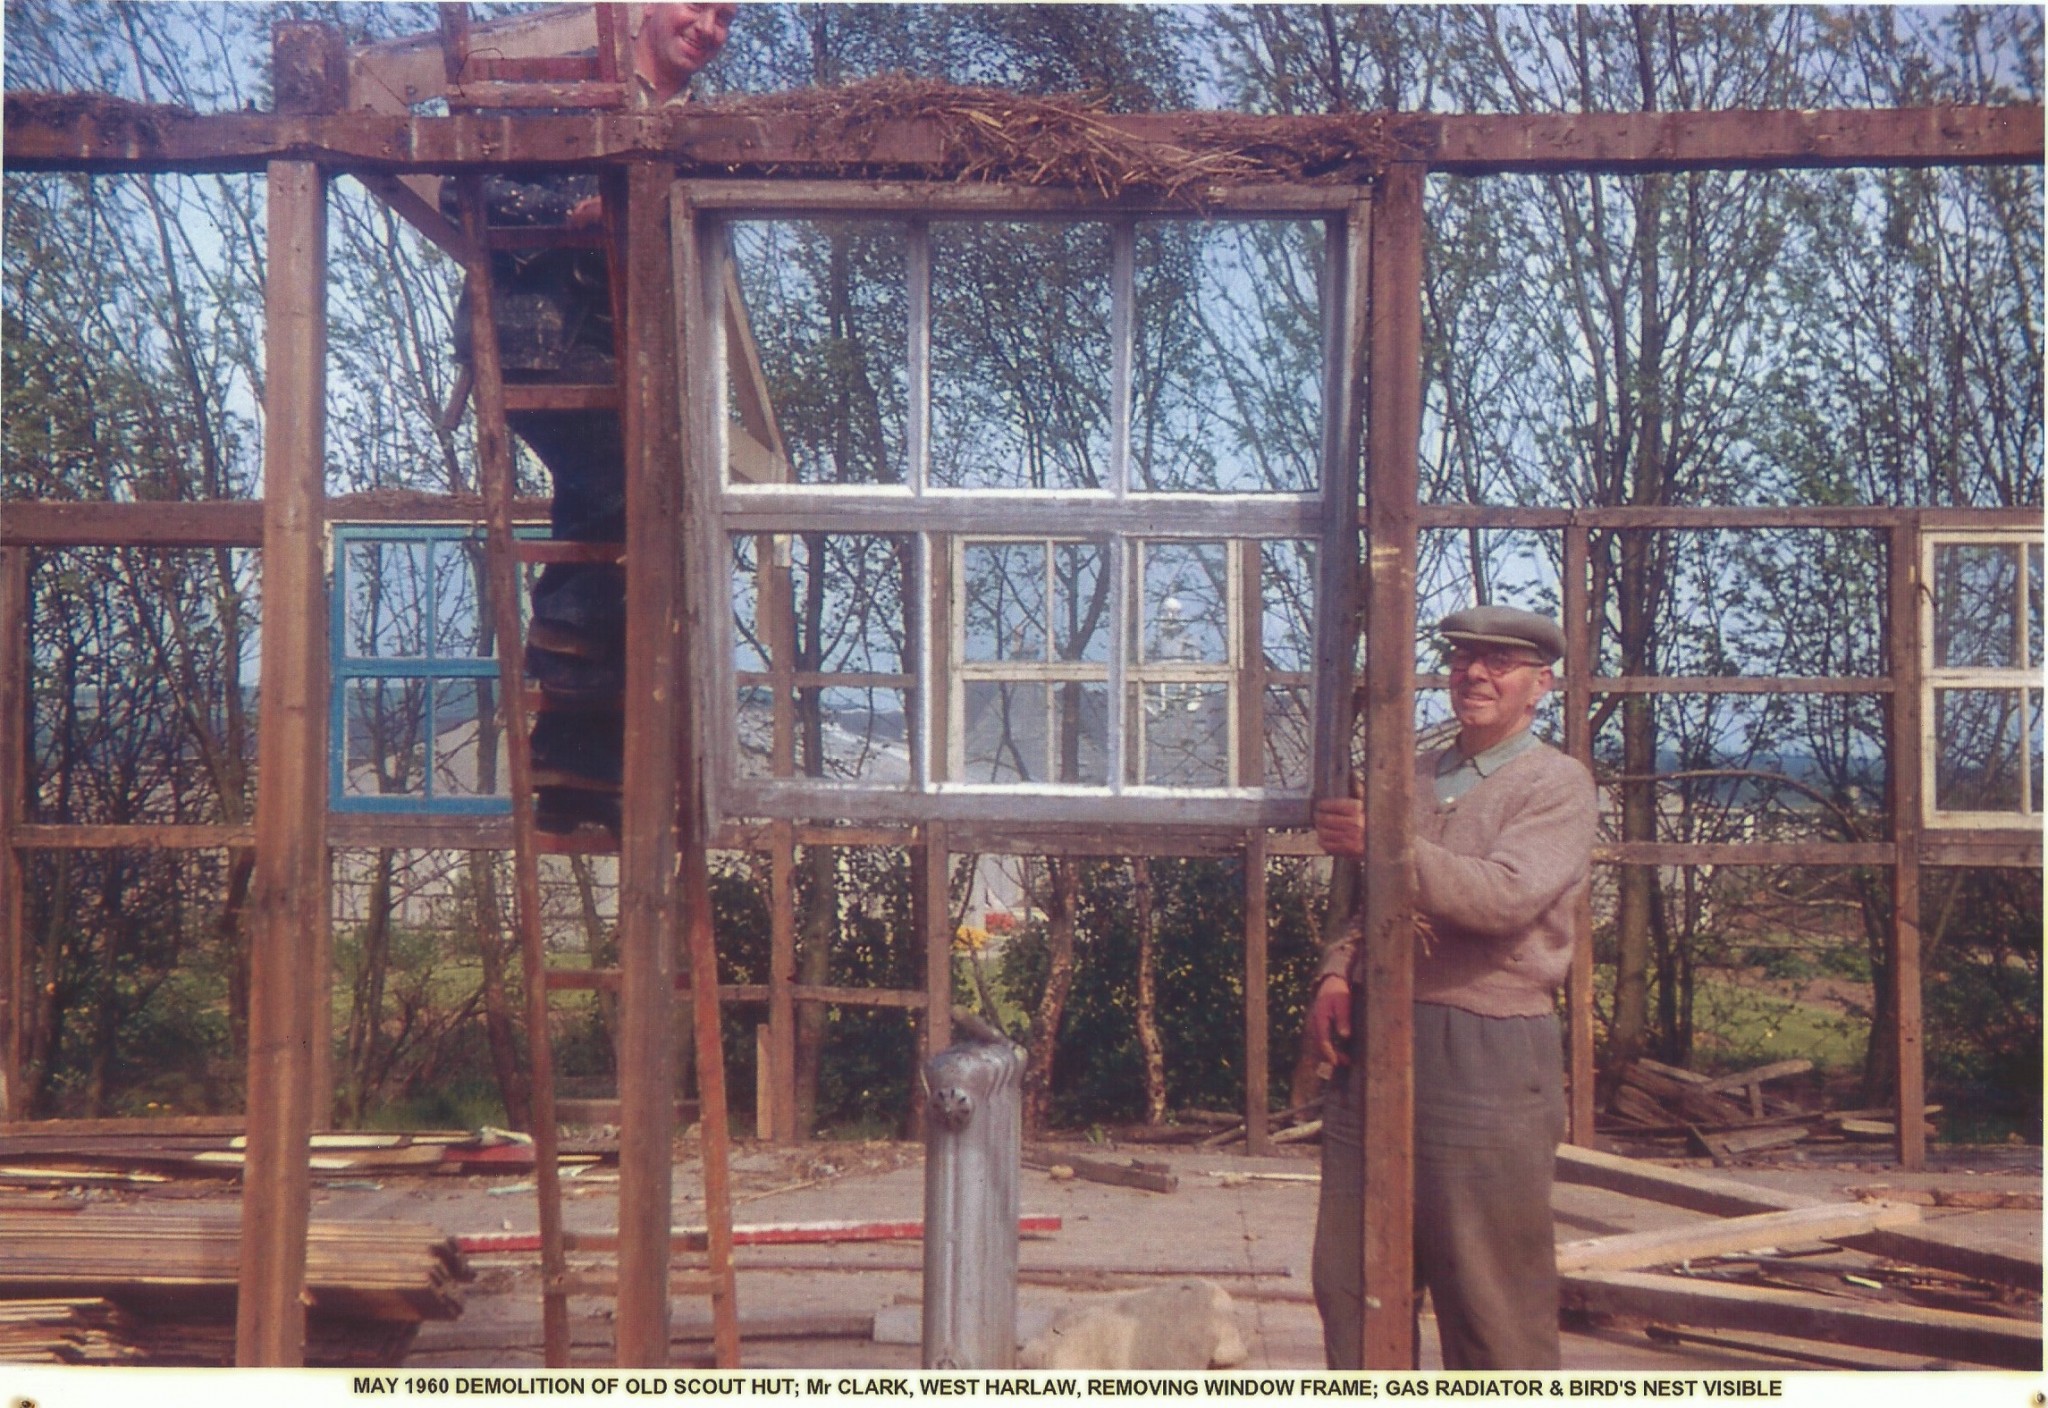 Demolition of old scout hut, Mr Clark of West Harlaw